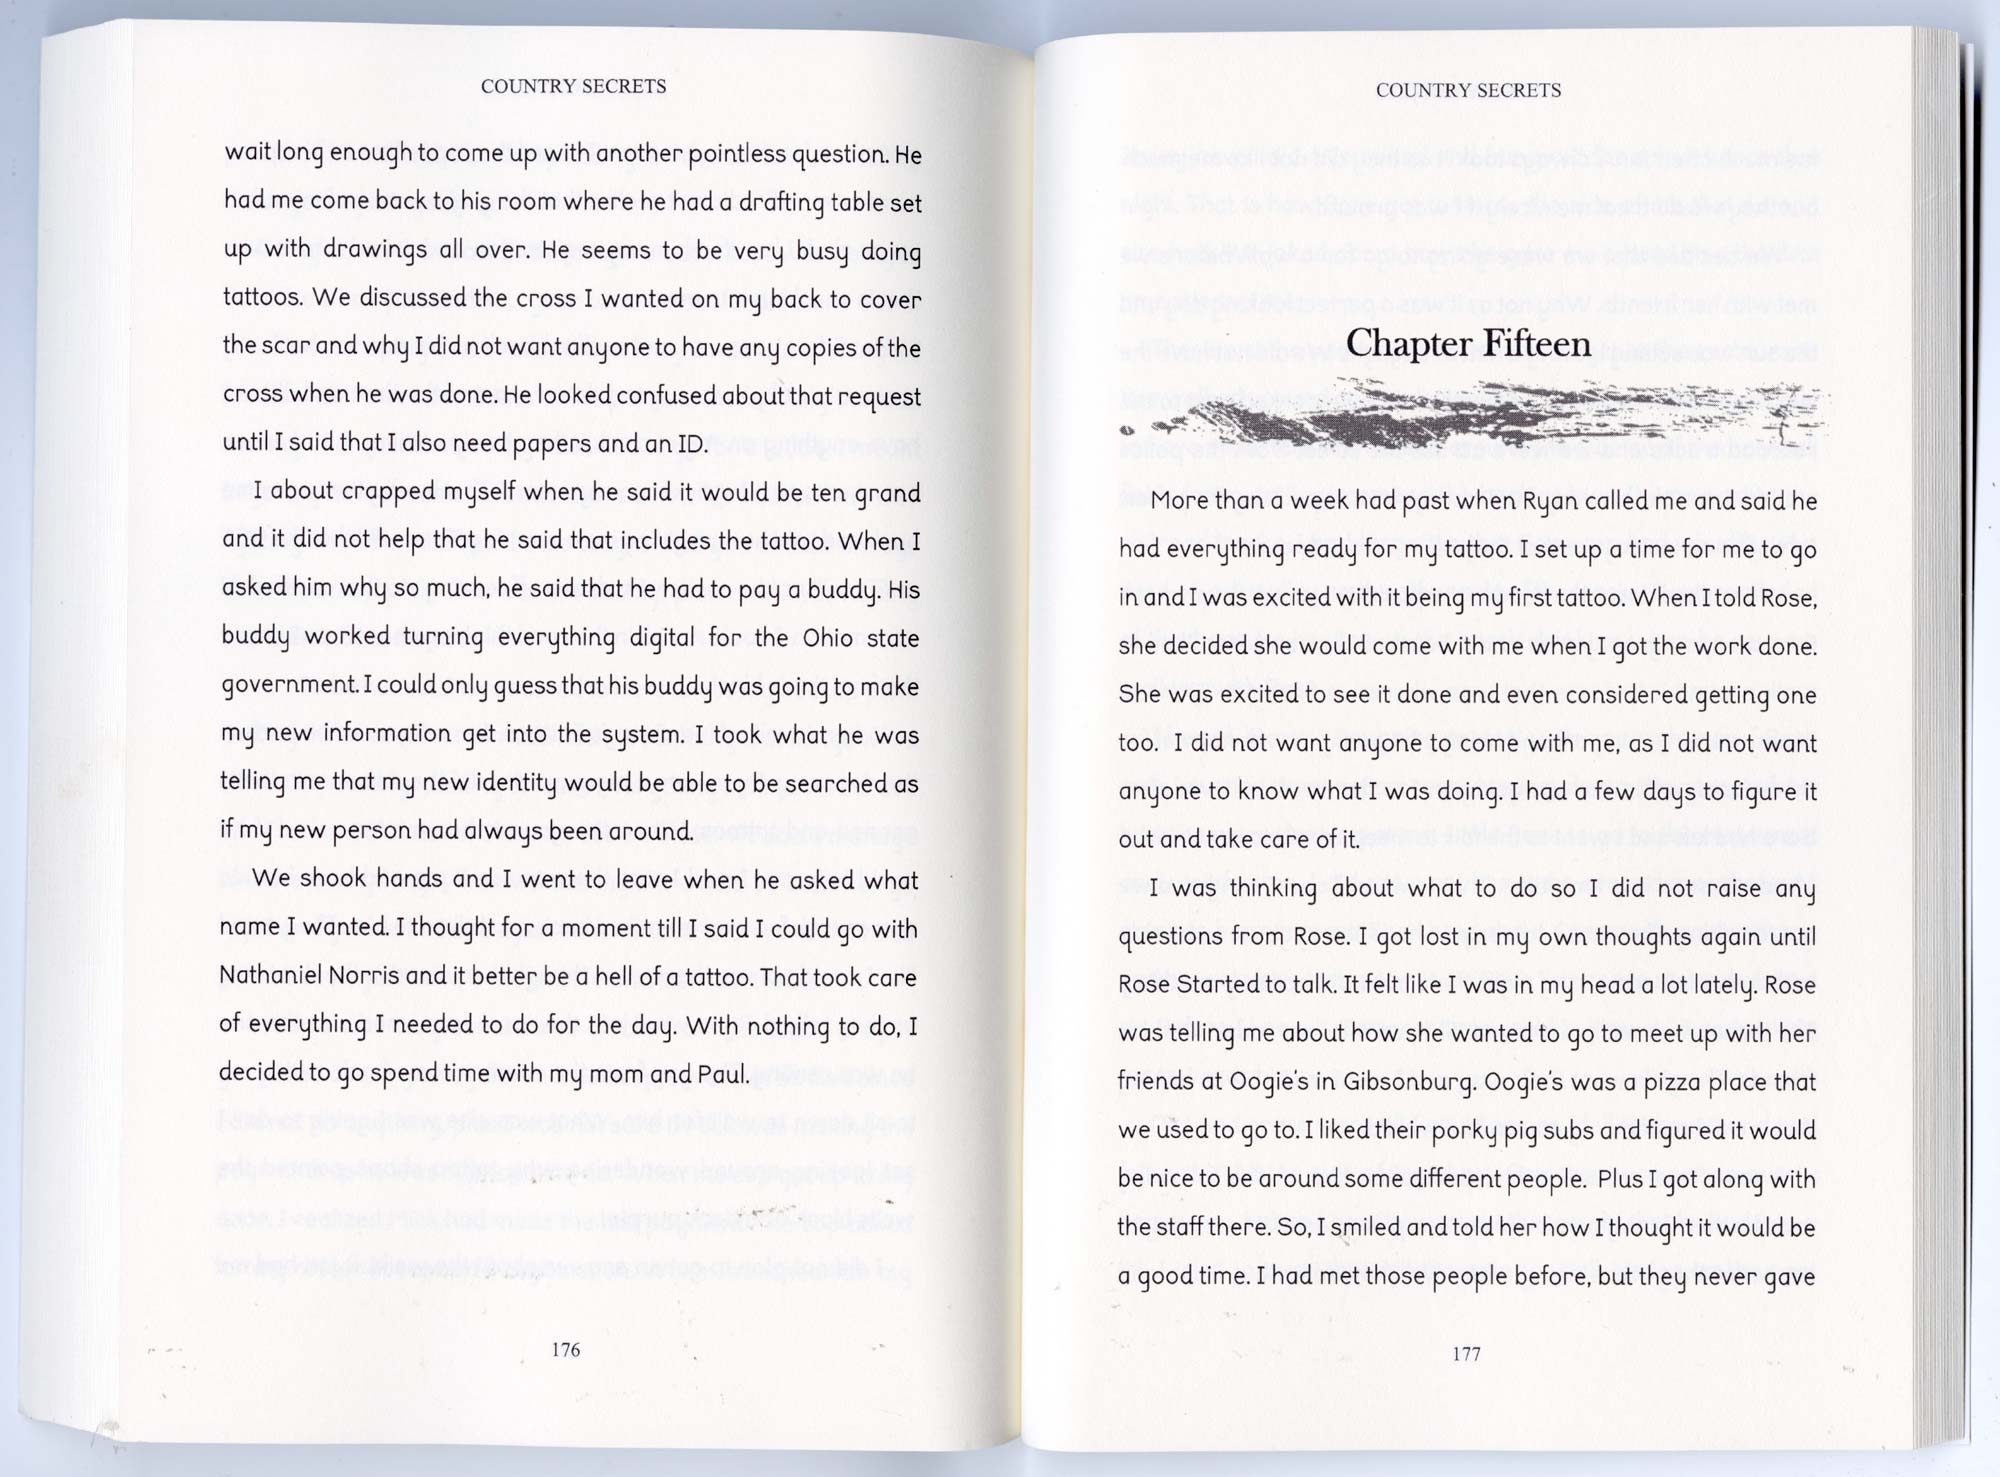 A book double page spread, with cream paper, the body text on the left with body text on the right and a main heading ‘Chapter 15’ above